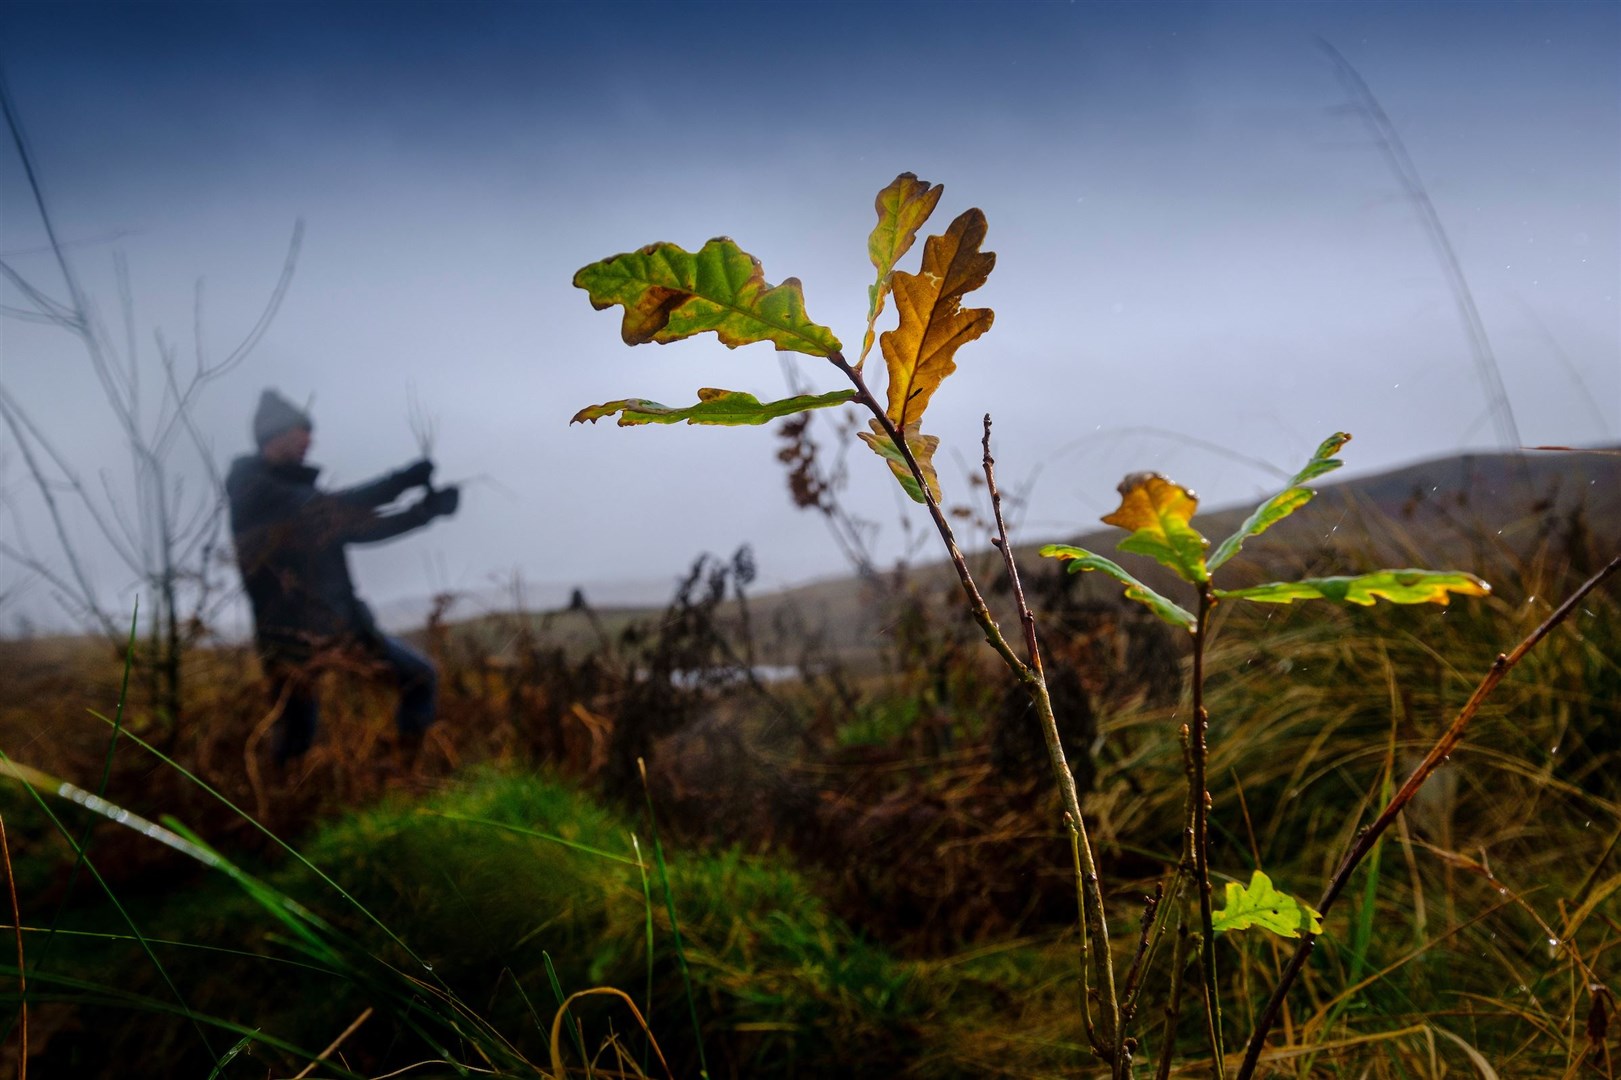 Johnnie Walker has committed to plant one million trees across Scotland by 2025.